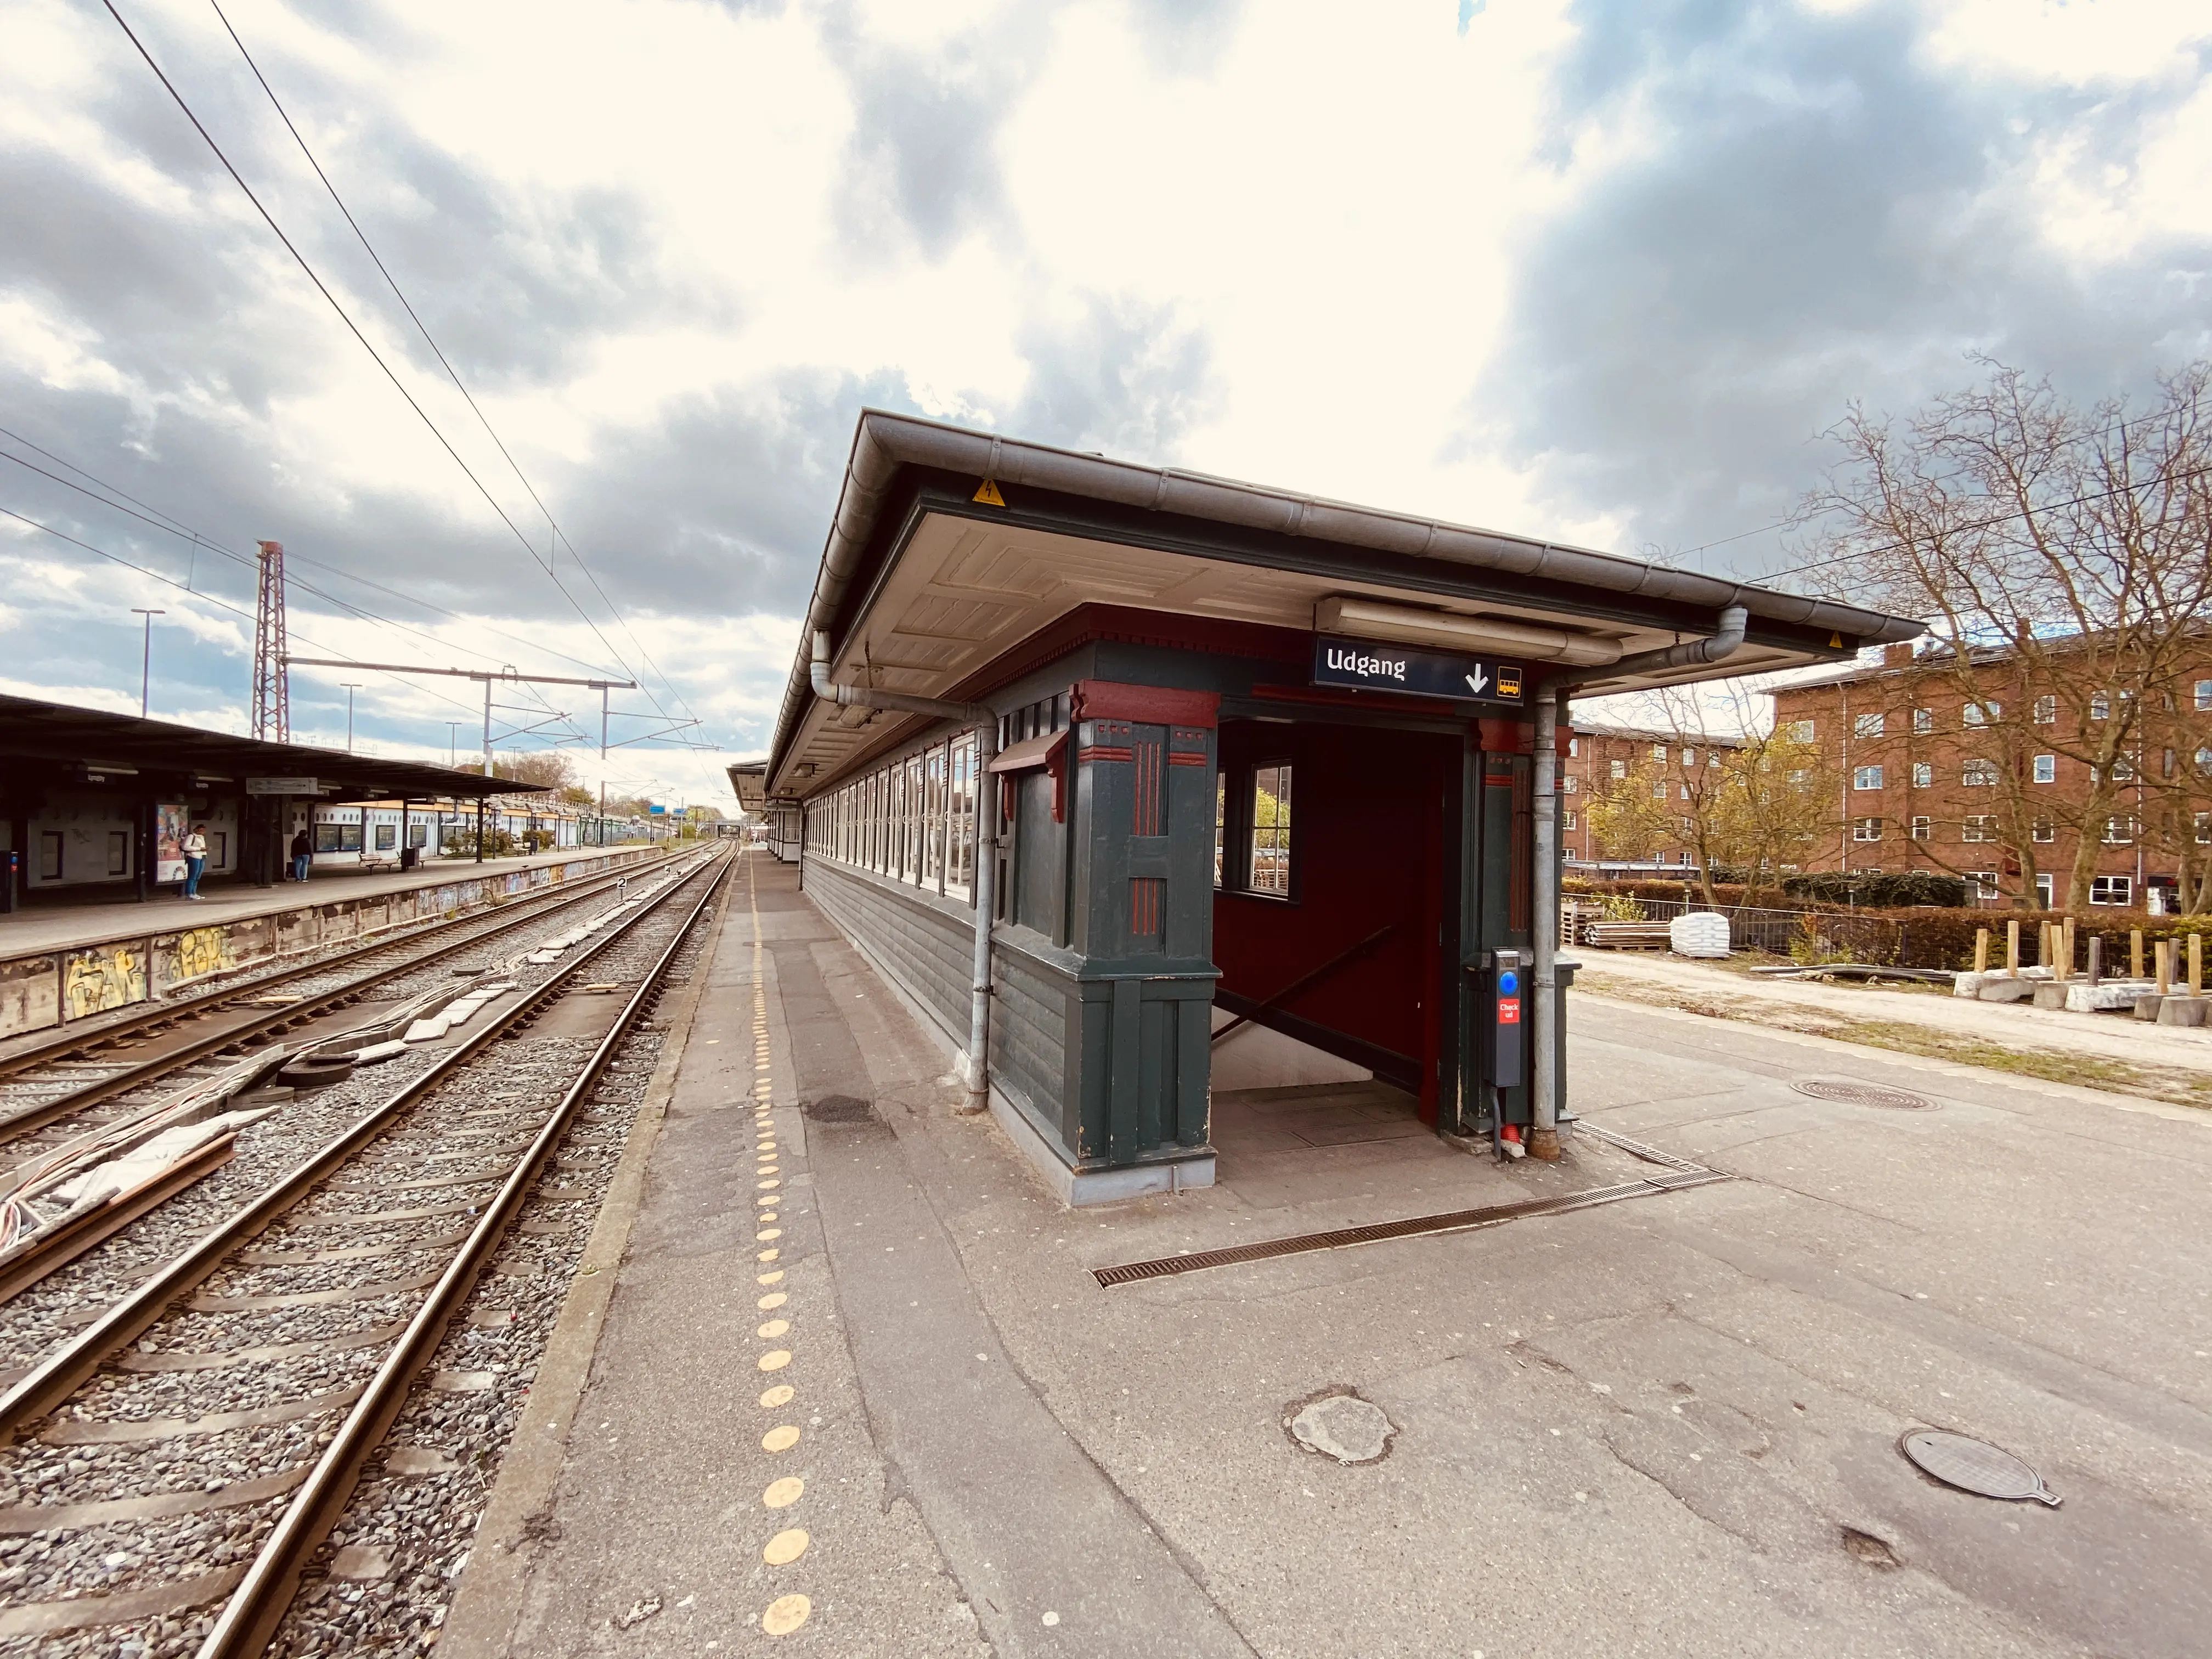 Lyngby (1957-) Station.